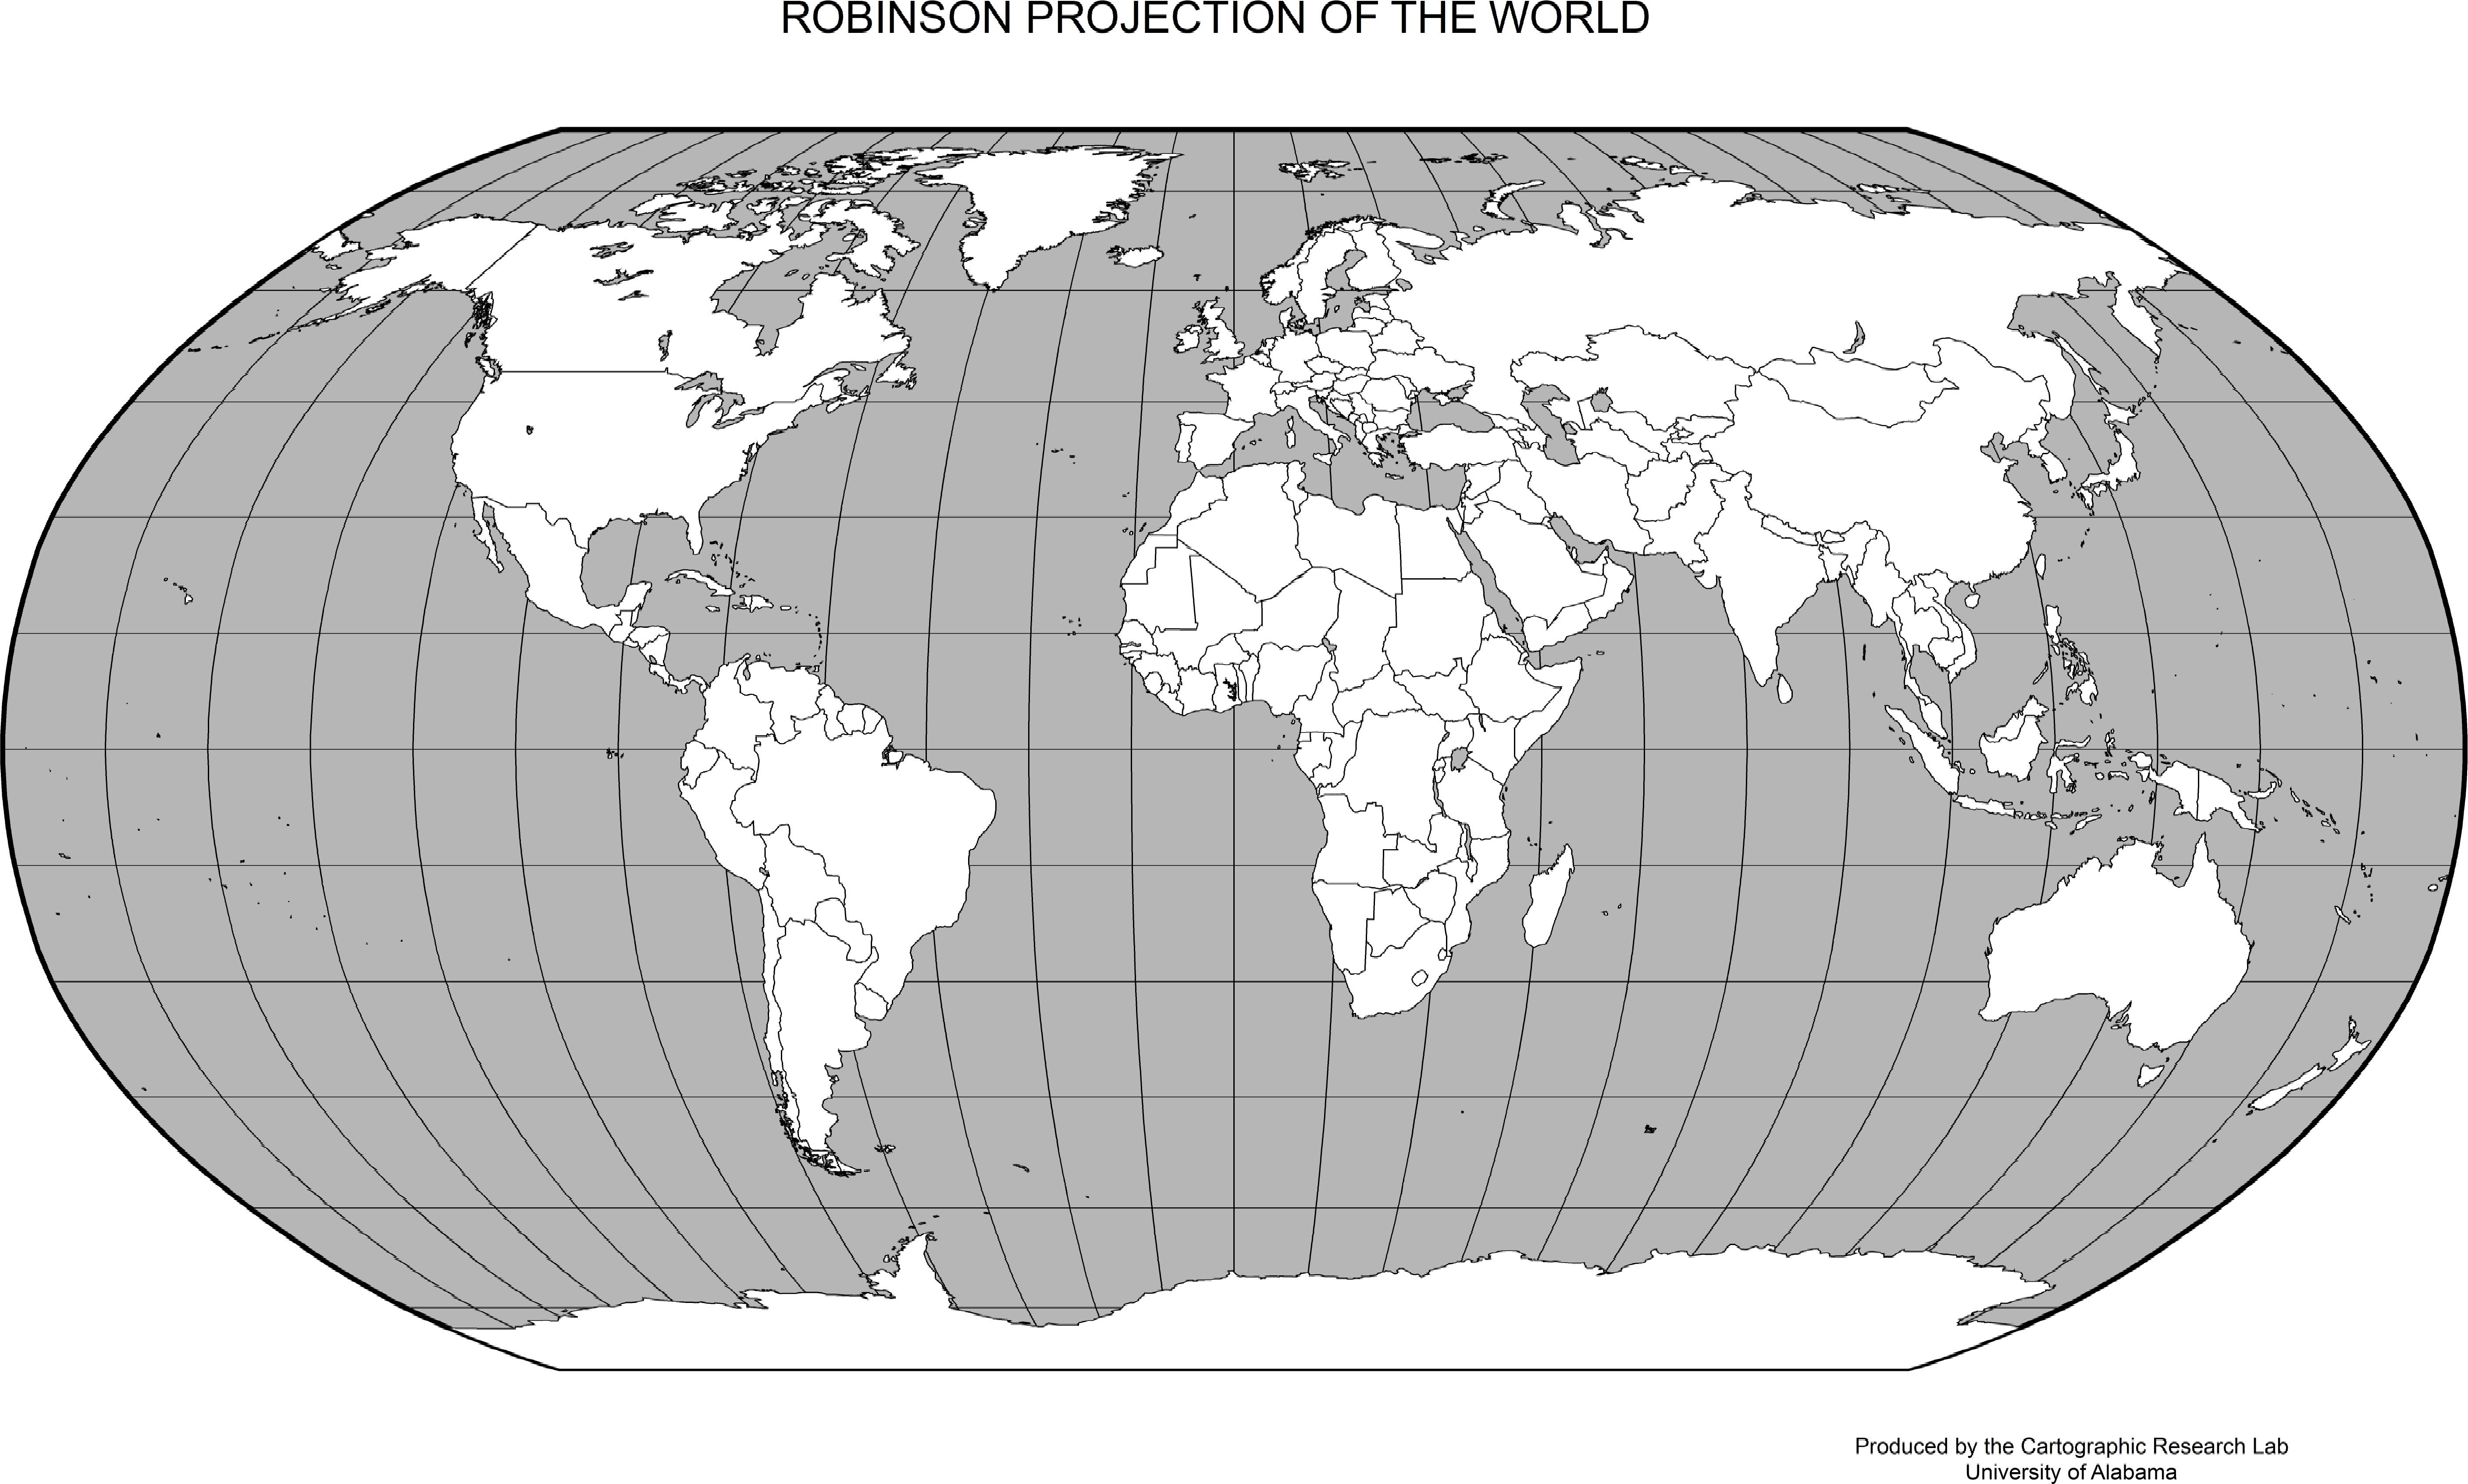 5 Best Images of Printable World Map Robinson Black and